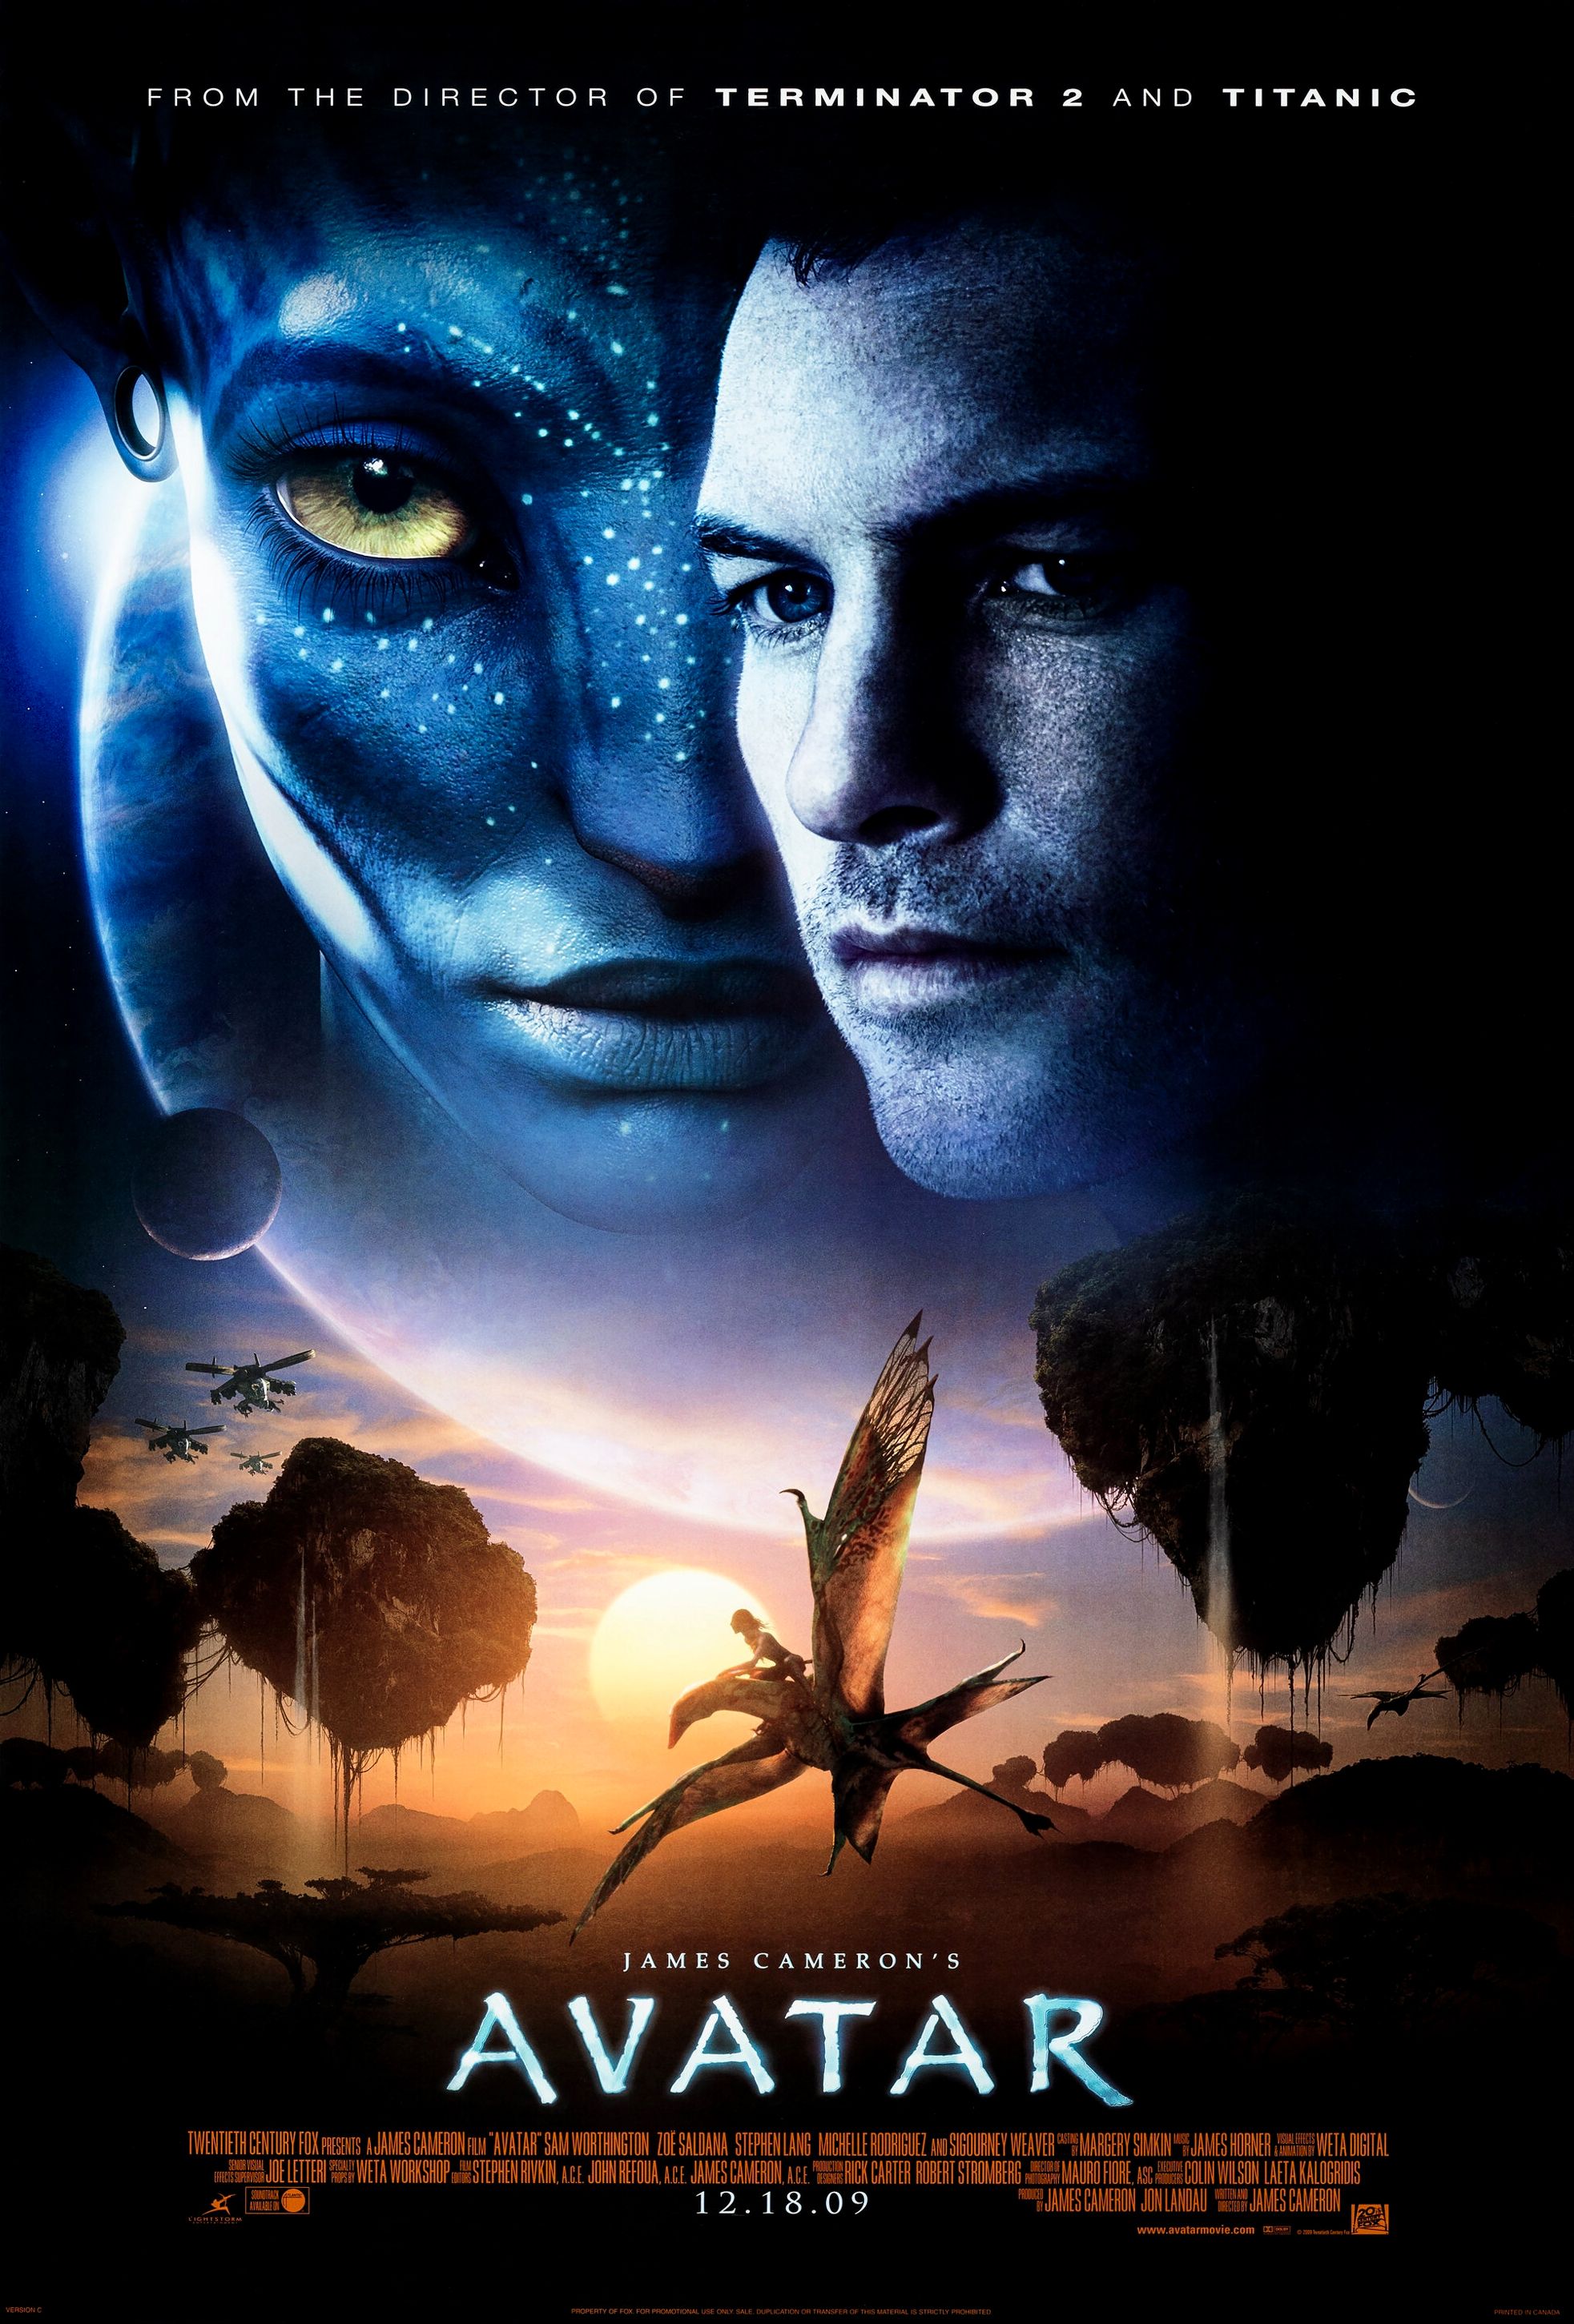 A Naavi face next to Jake Sully's face superimposed on the planet Pandora on the Avatar Official Movie Poster